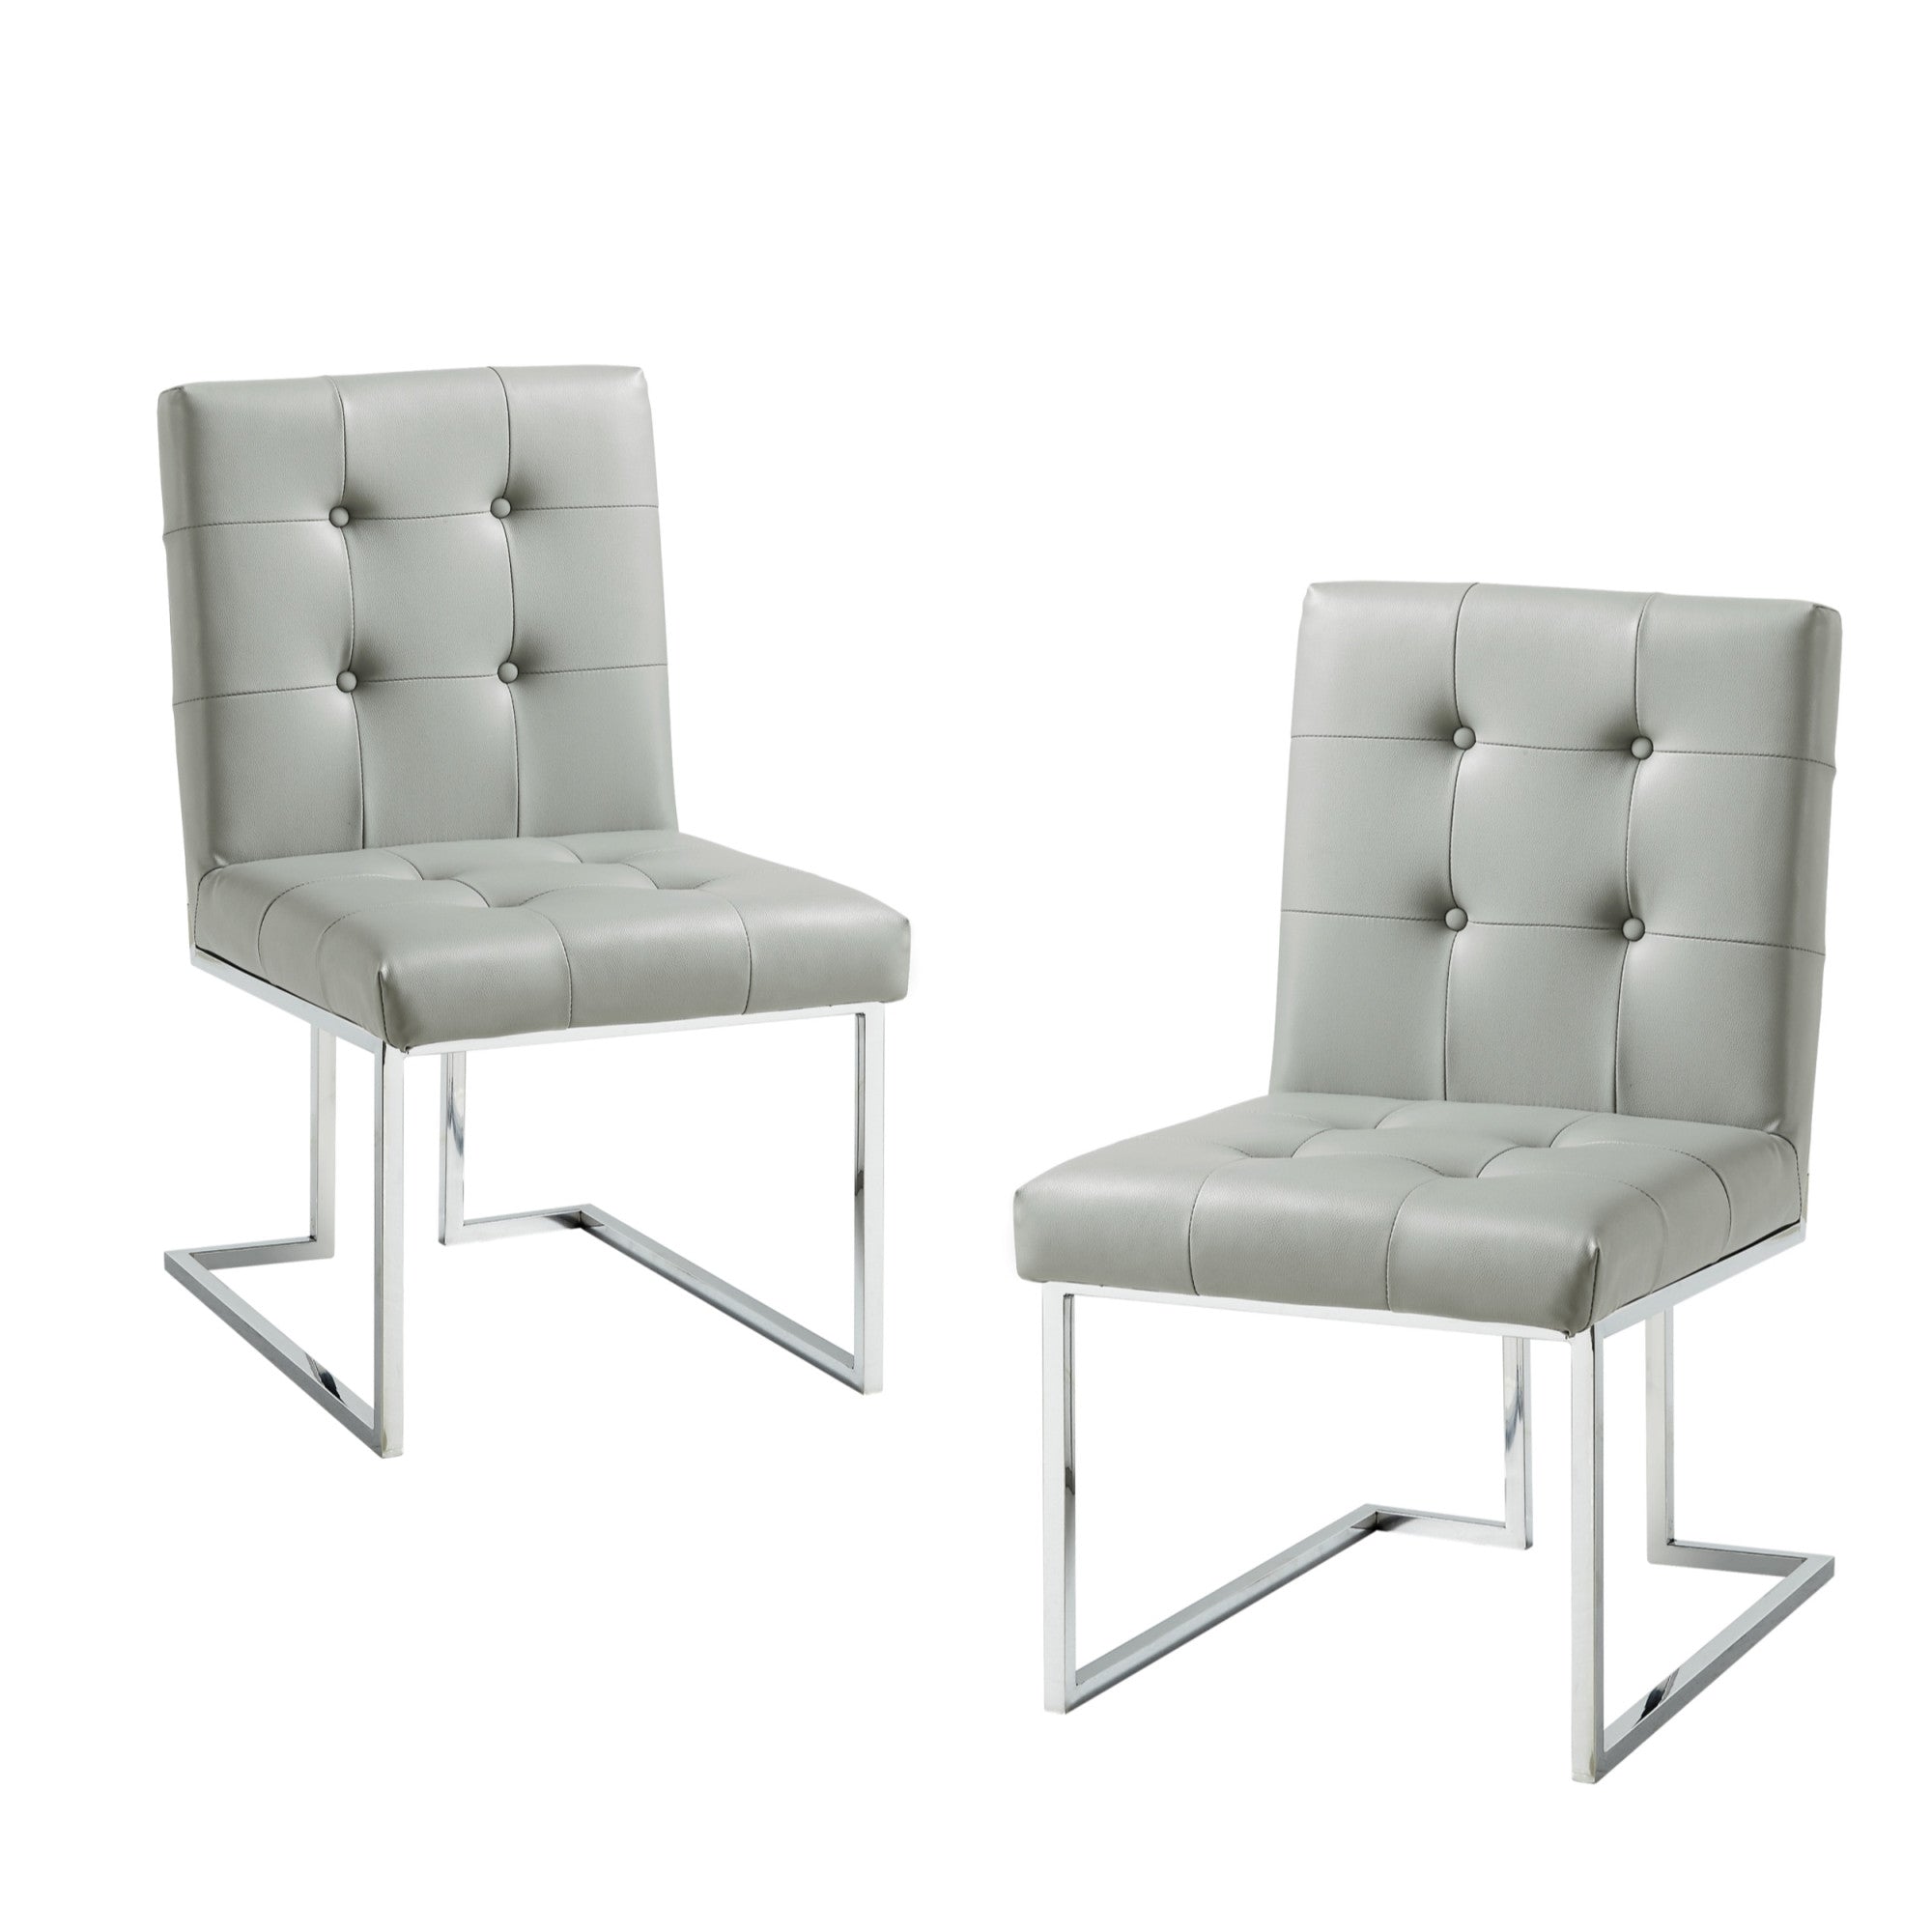 Set of Two Tufted Light Gray and Silver Metallic Upholstered Faux Leather Dining Side Chairs